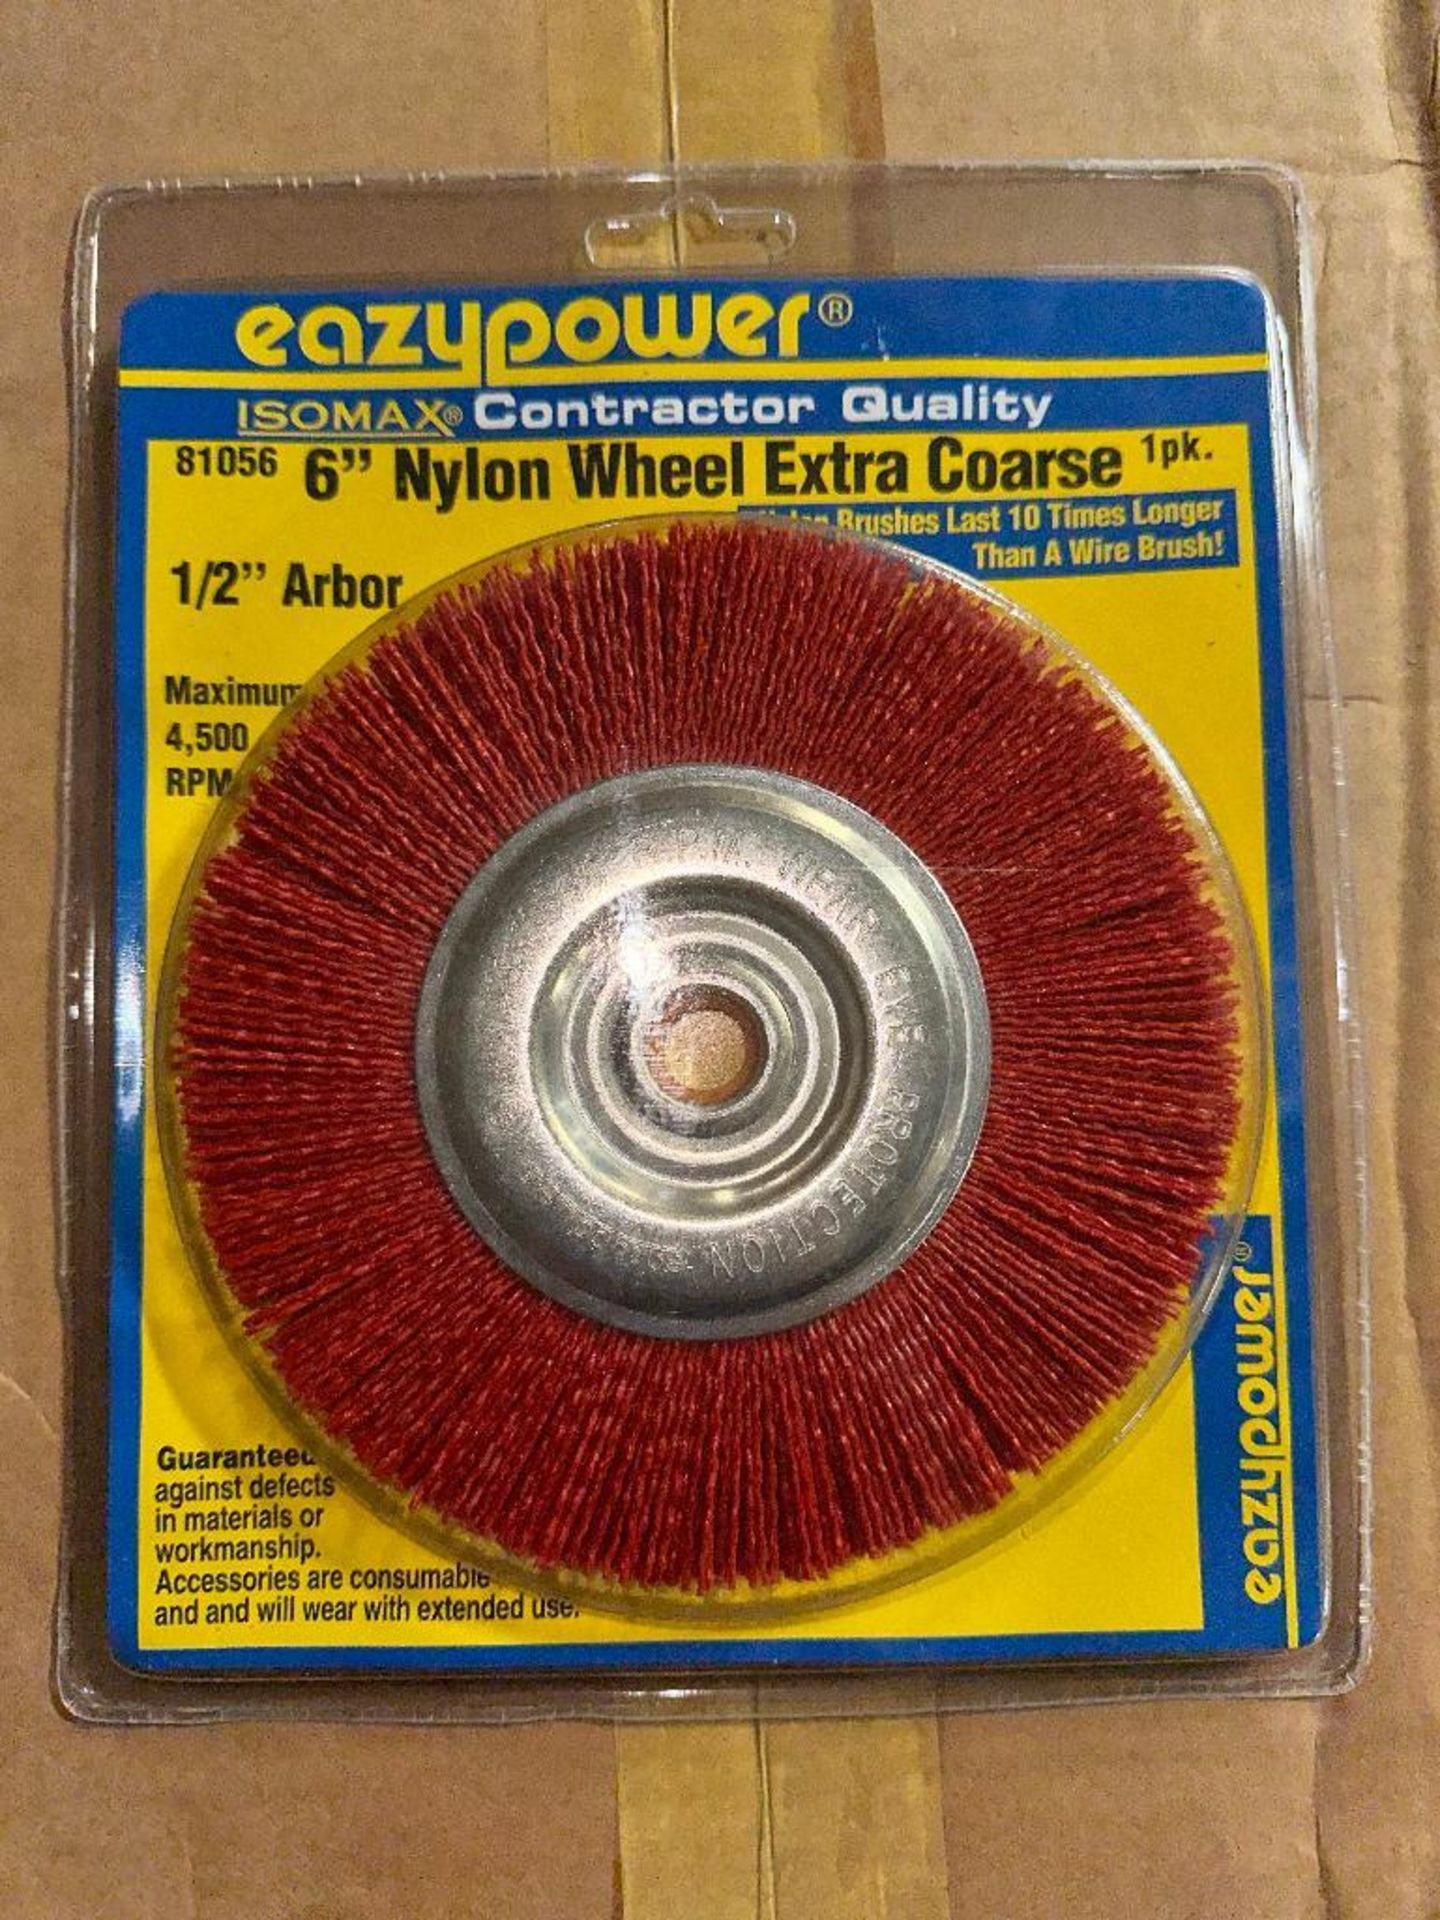 DESCRIPTION: (4) CASES OF 6" WIRE WHEEL BRUSH. ( IN PACKAGING ) BRAND / MODEL: EAZY POWER 81056 ADDI